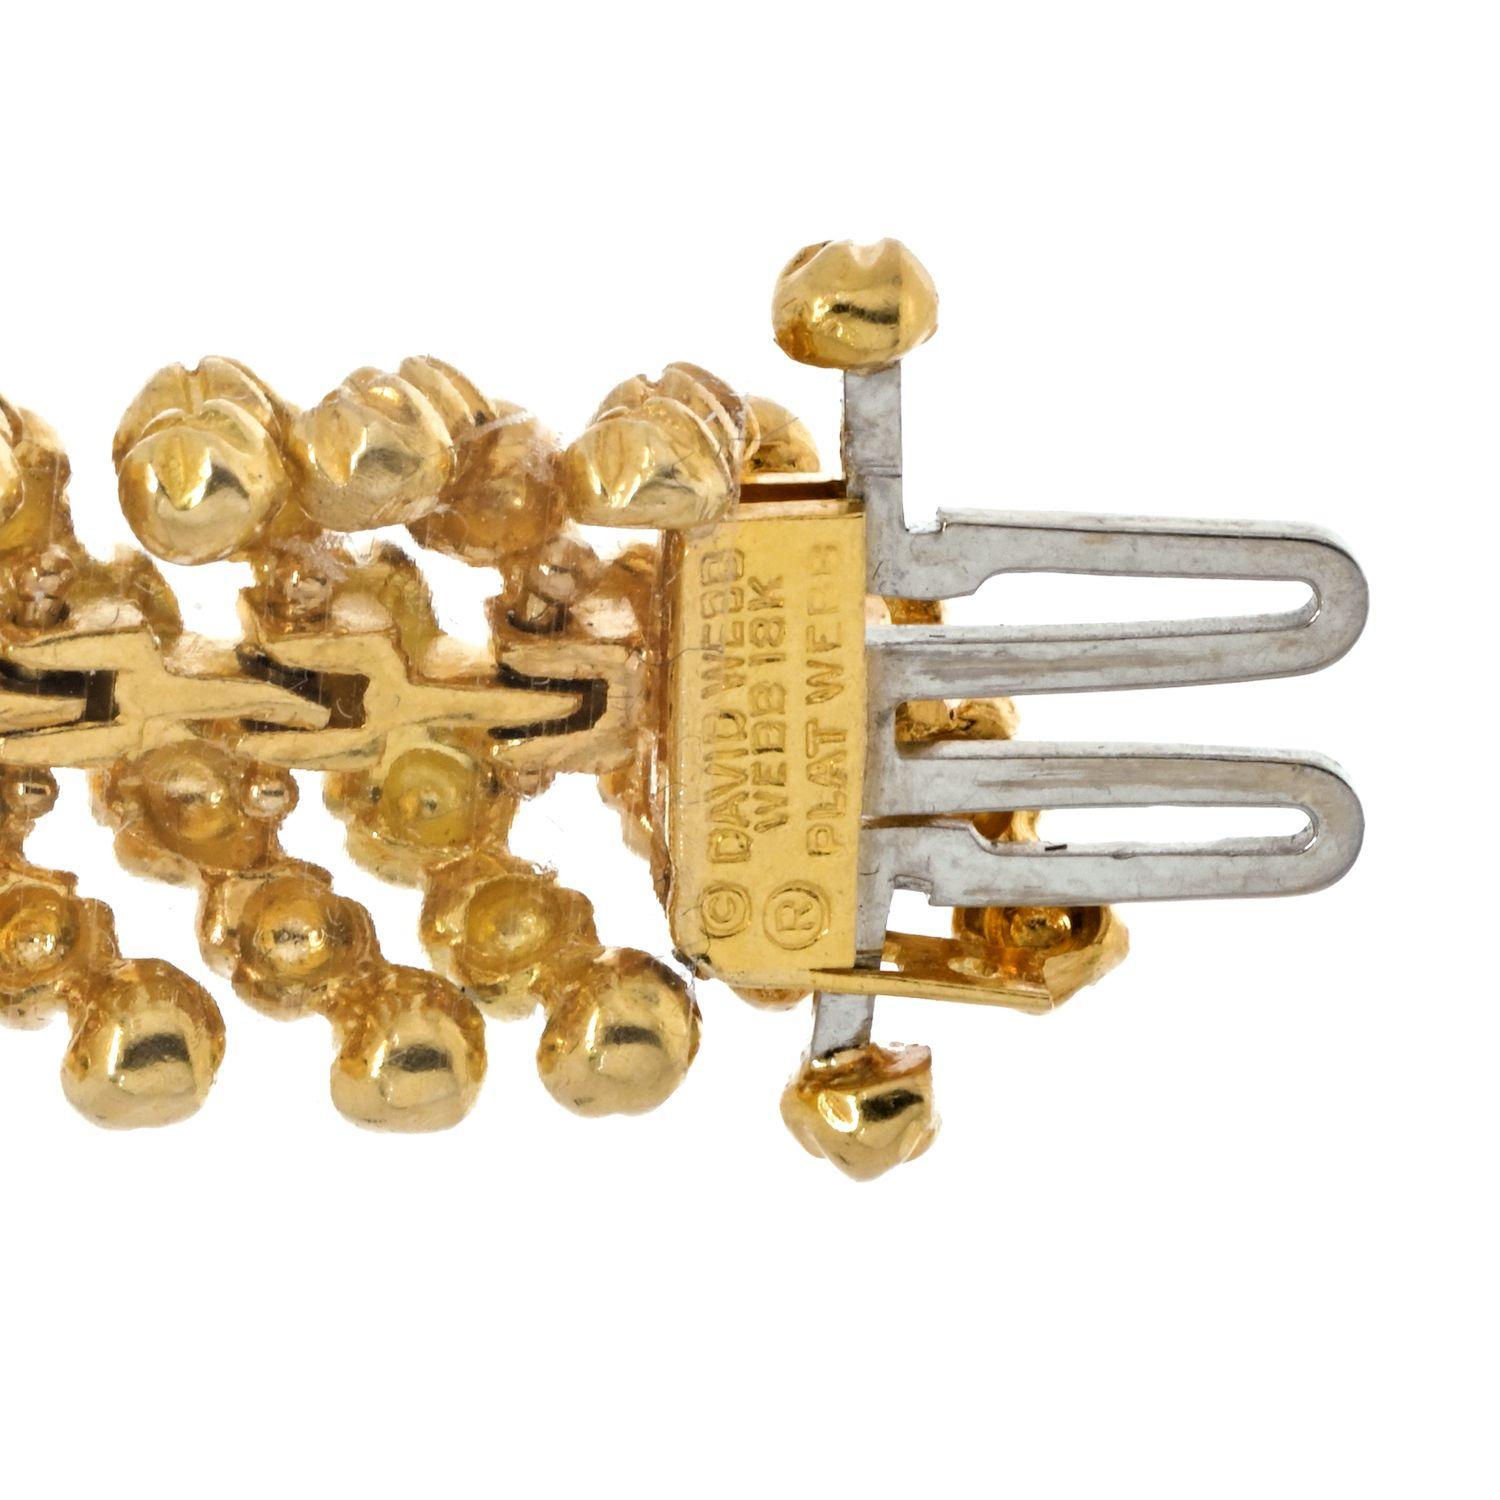 Exclusively from our David Webb estate collection, comes a brilliant and textured bracelet. David Webb is the quintessential American jeweler of exceedingly modern jewelry. The bracelet is 18K yellow gold and platinum with scalloped links and